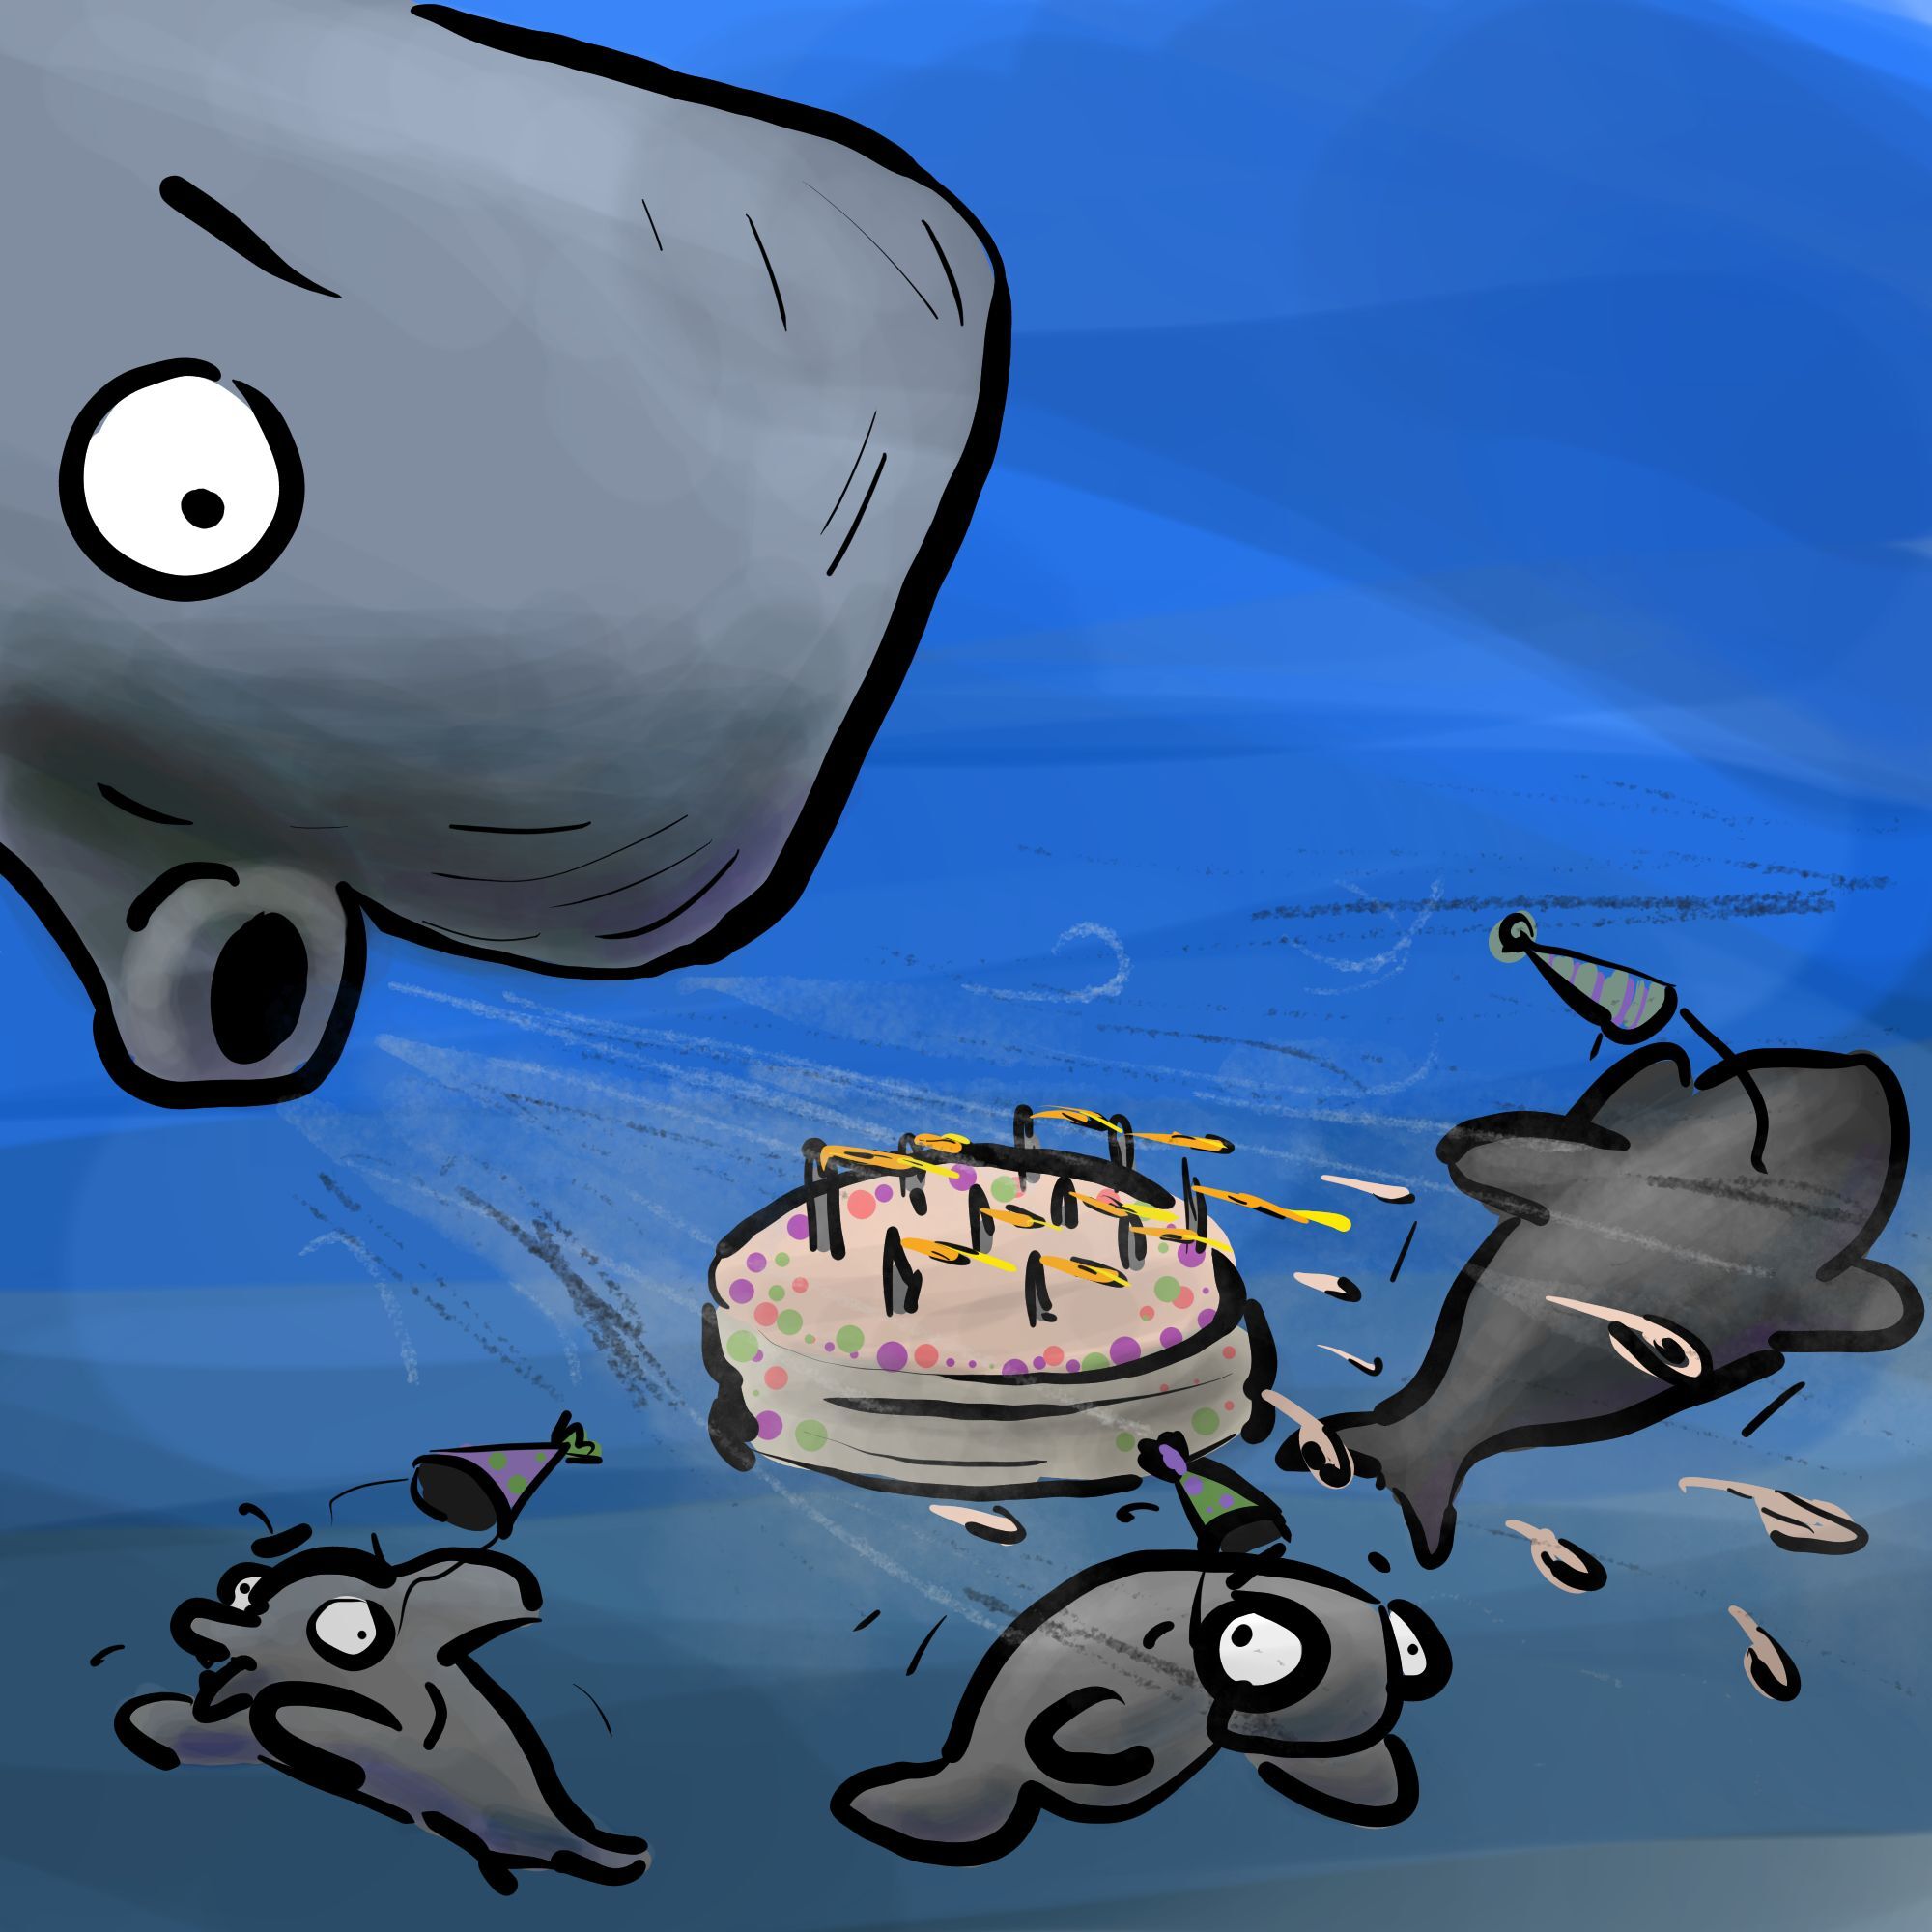 Whale blowing out candles on cake... and making a big mess.